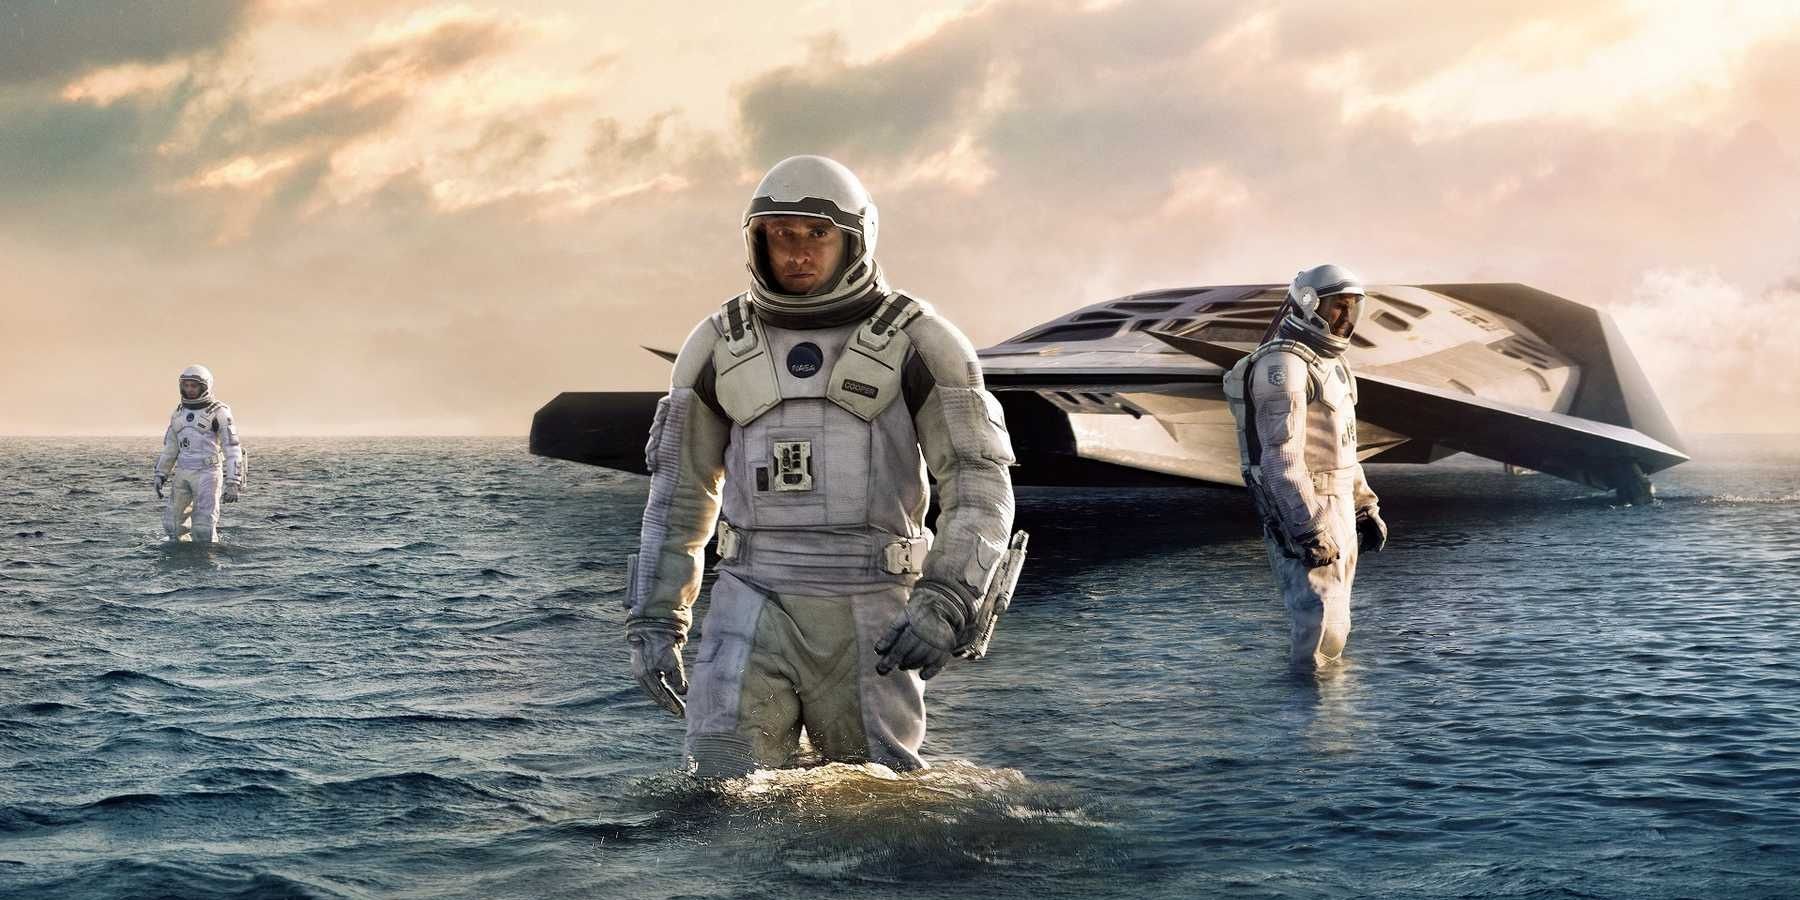 Cooper and Brand arrive at the water planet in Interstellar